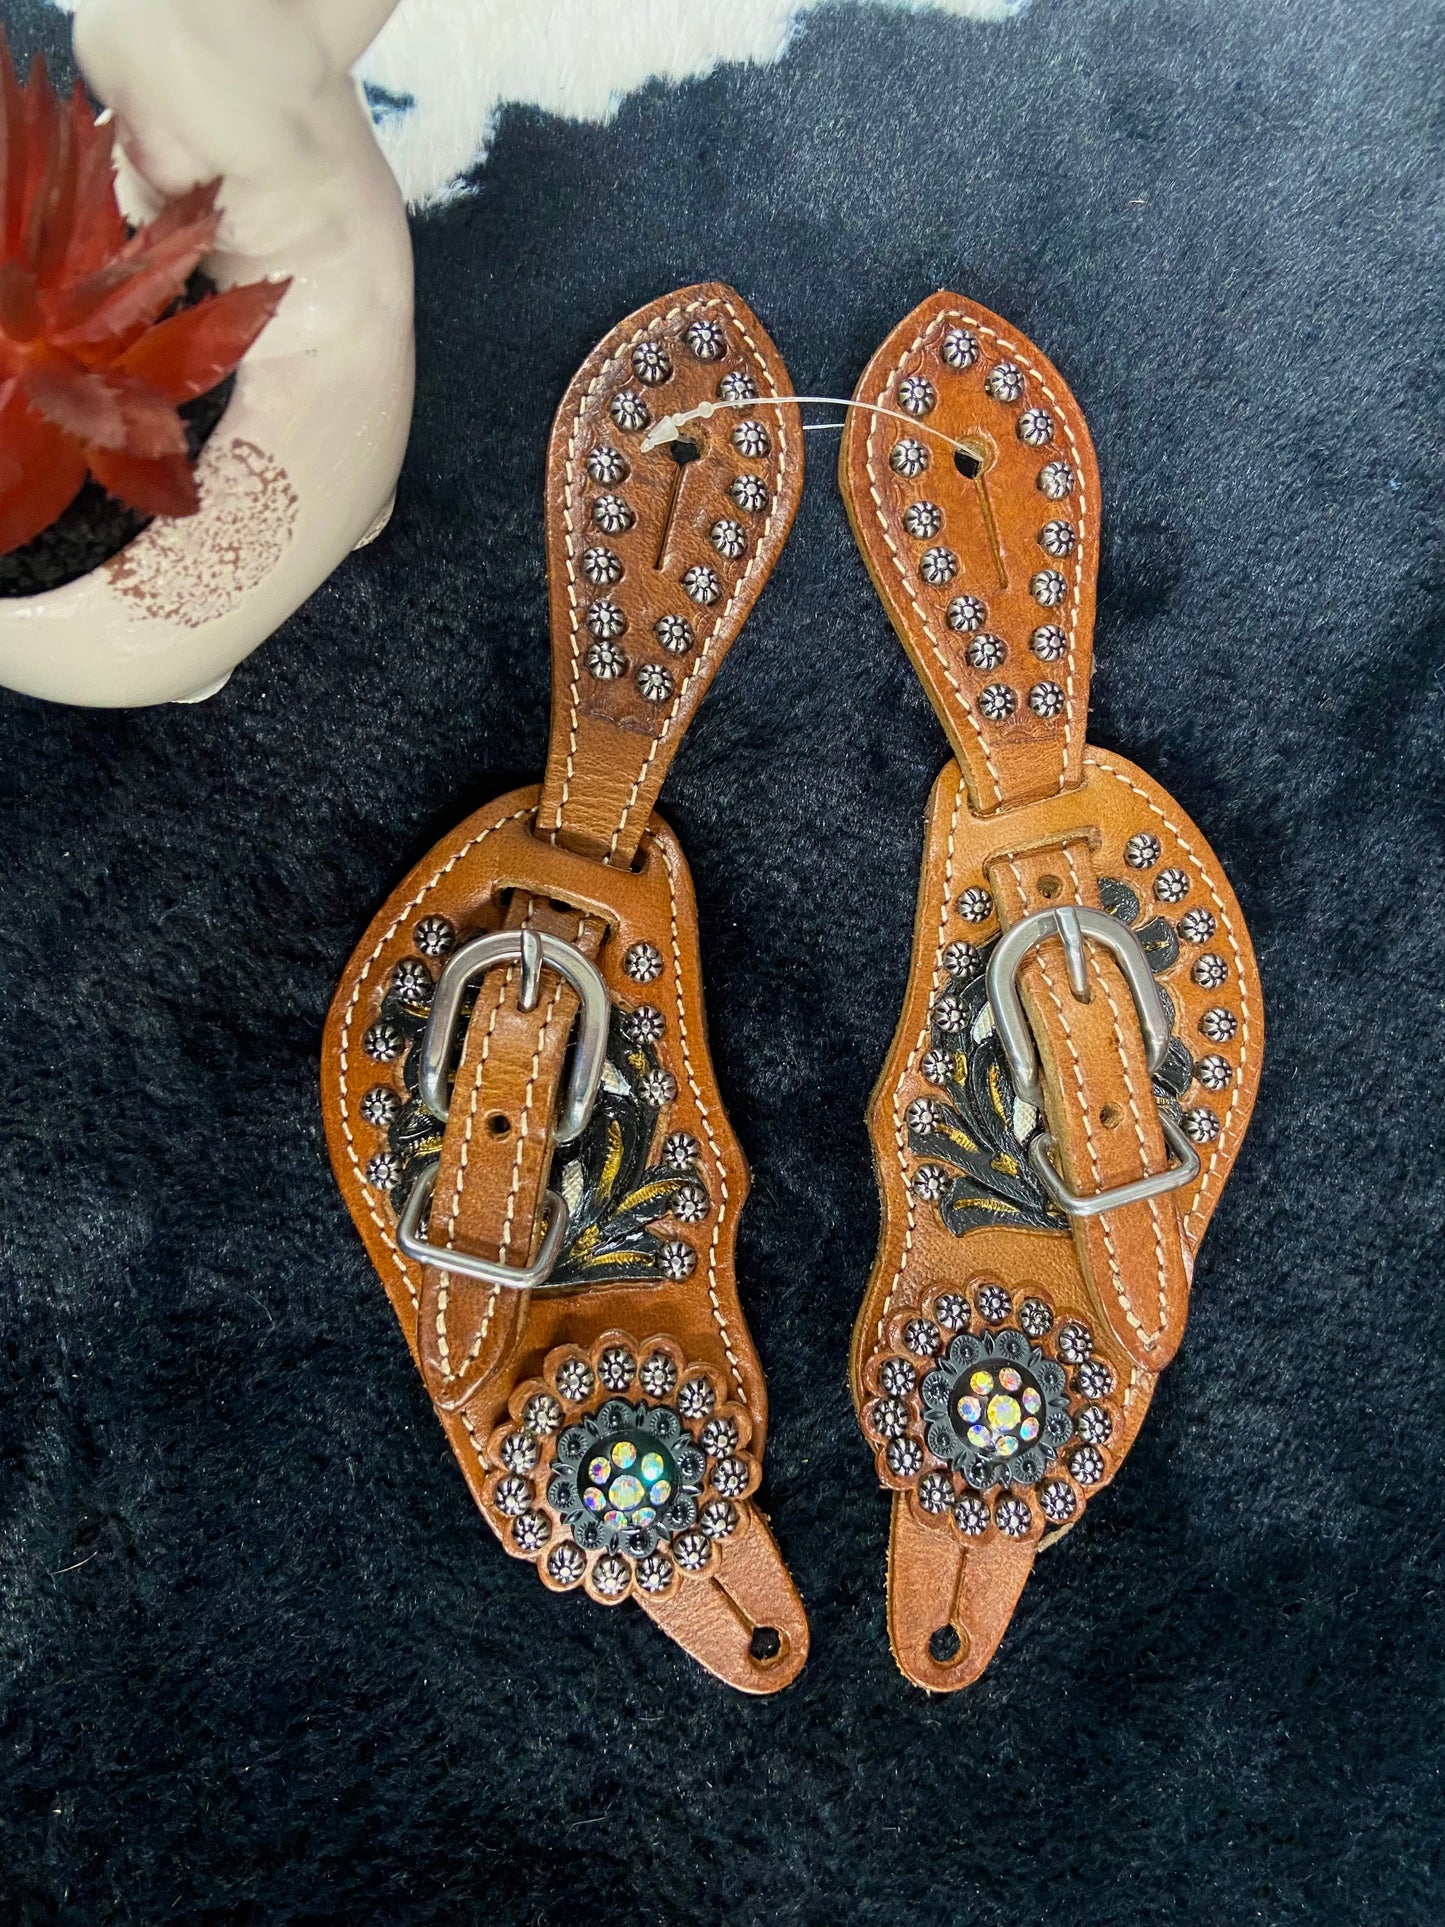 Adjustable Youth size Painted floral Tooled Spur Straps w/ Crystal conchos